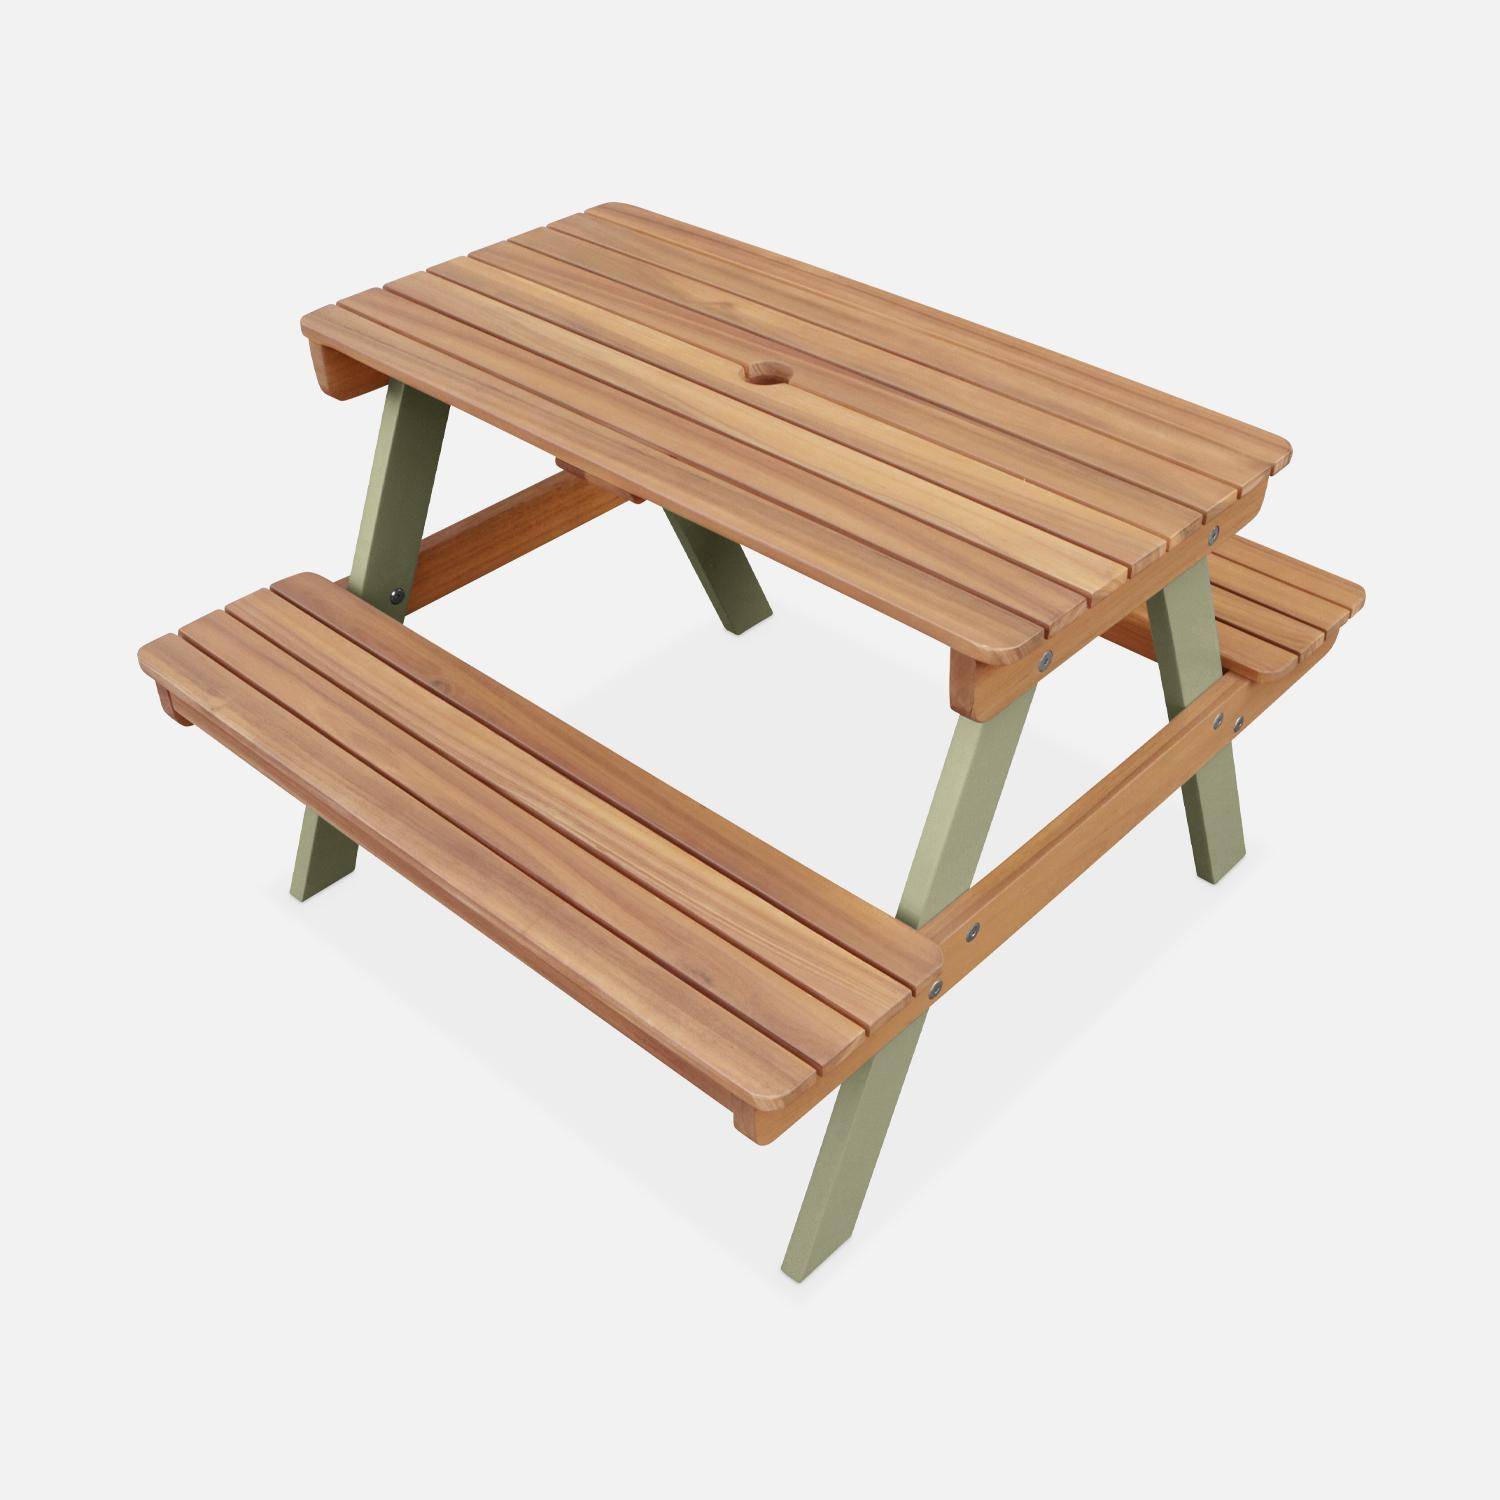 Acacia wood picnic table for children, 2 places, colour light teak and grey green,sweeek,Photo4